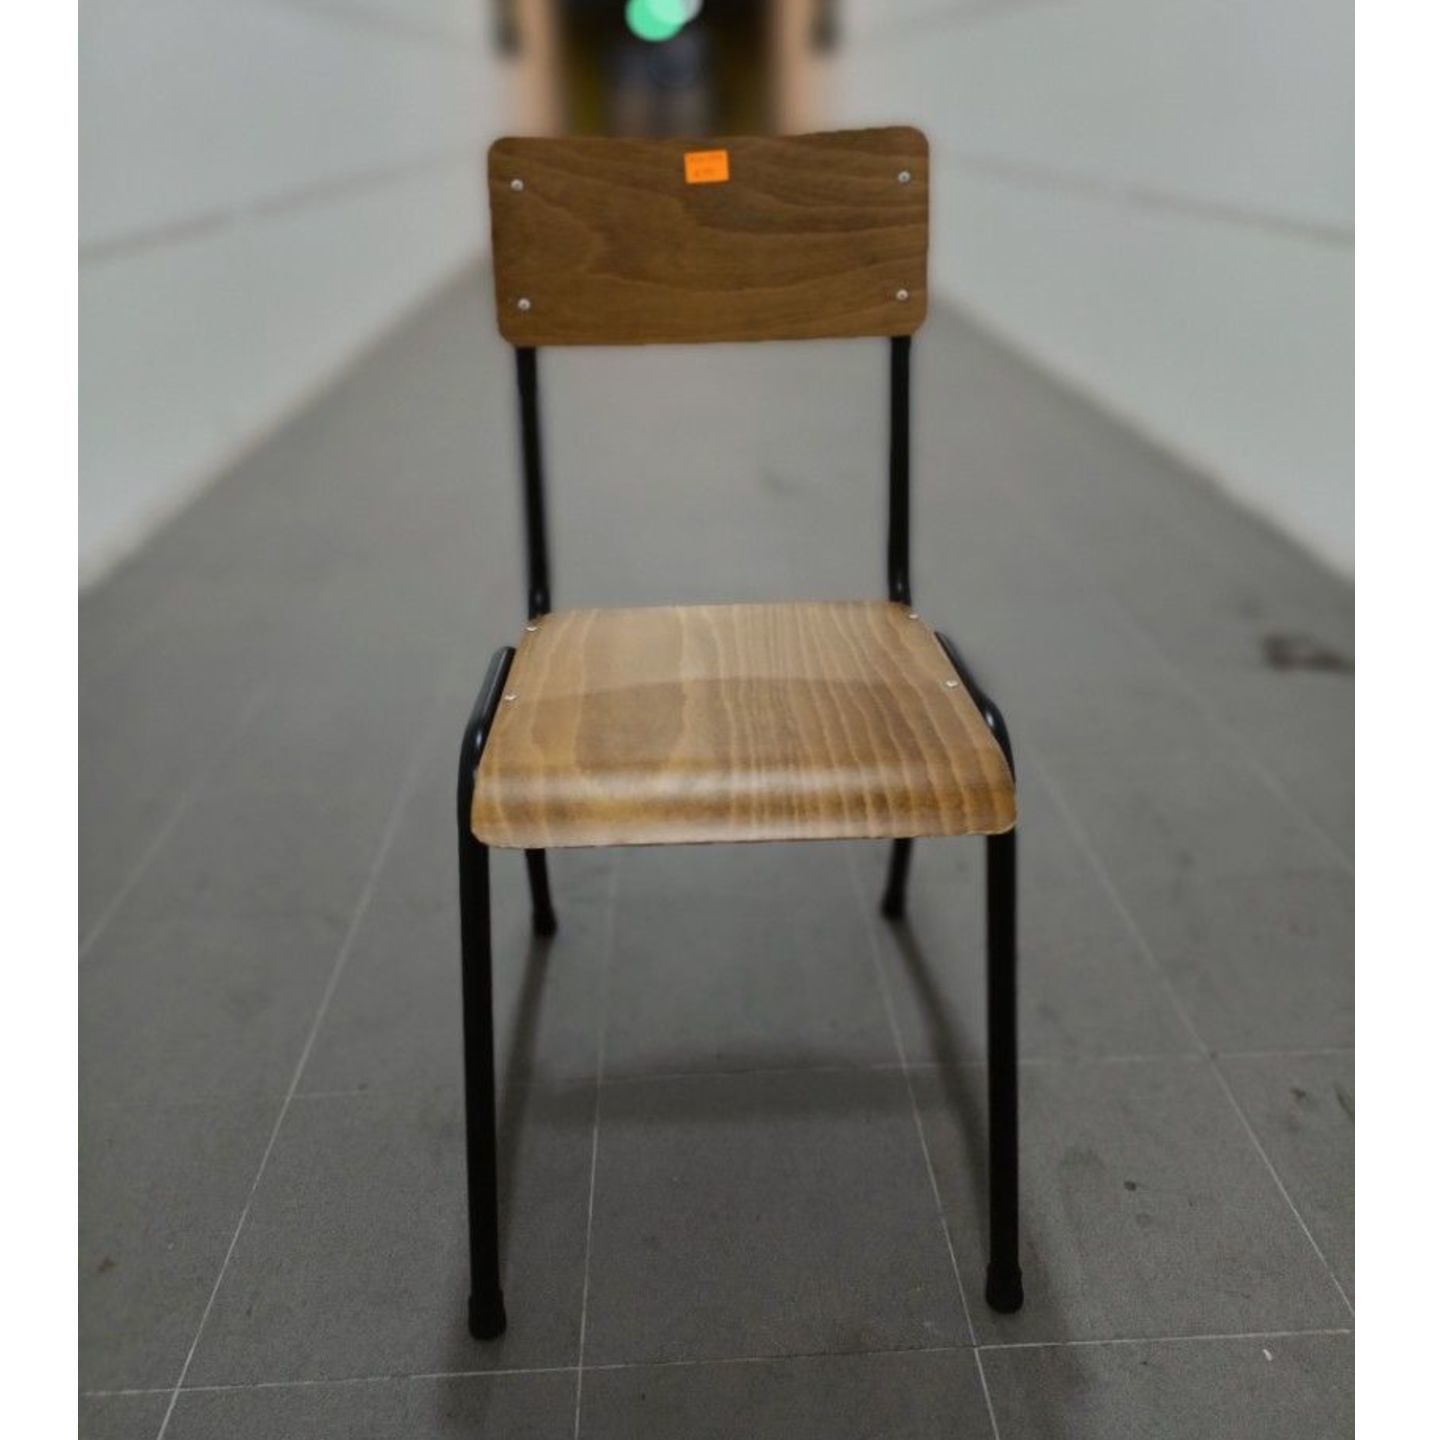 FIRE SALE - VERNE Wooden Chair (ONLY PIECE)